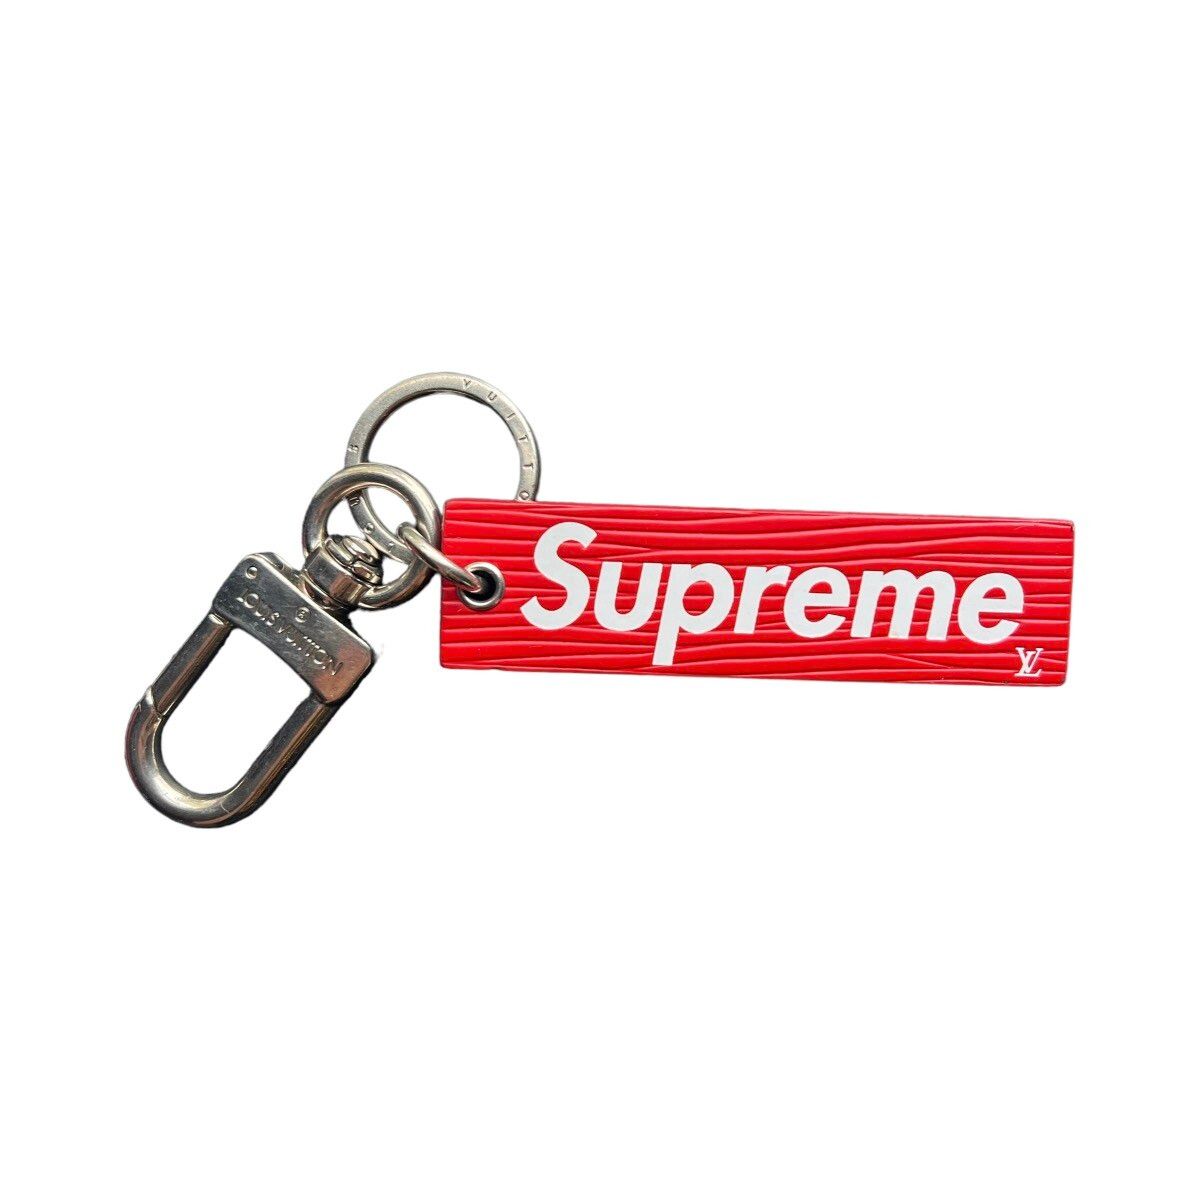 LOUIS VUITTON Leather Keychain Charm Limited Edition Supreme MP2074